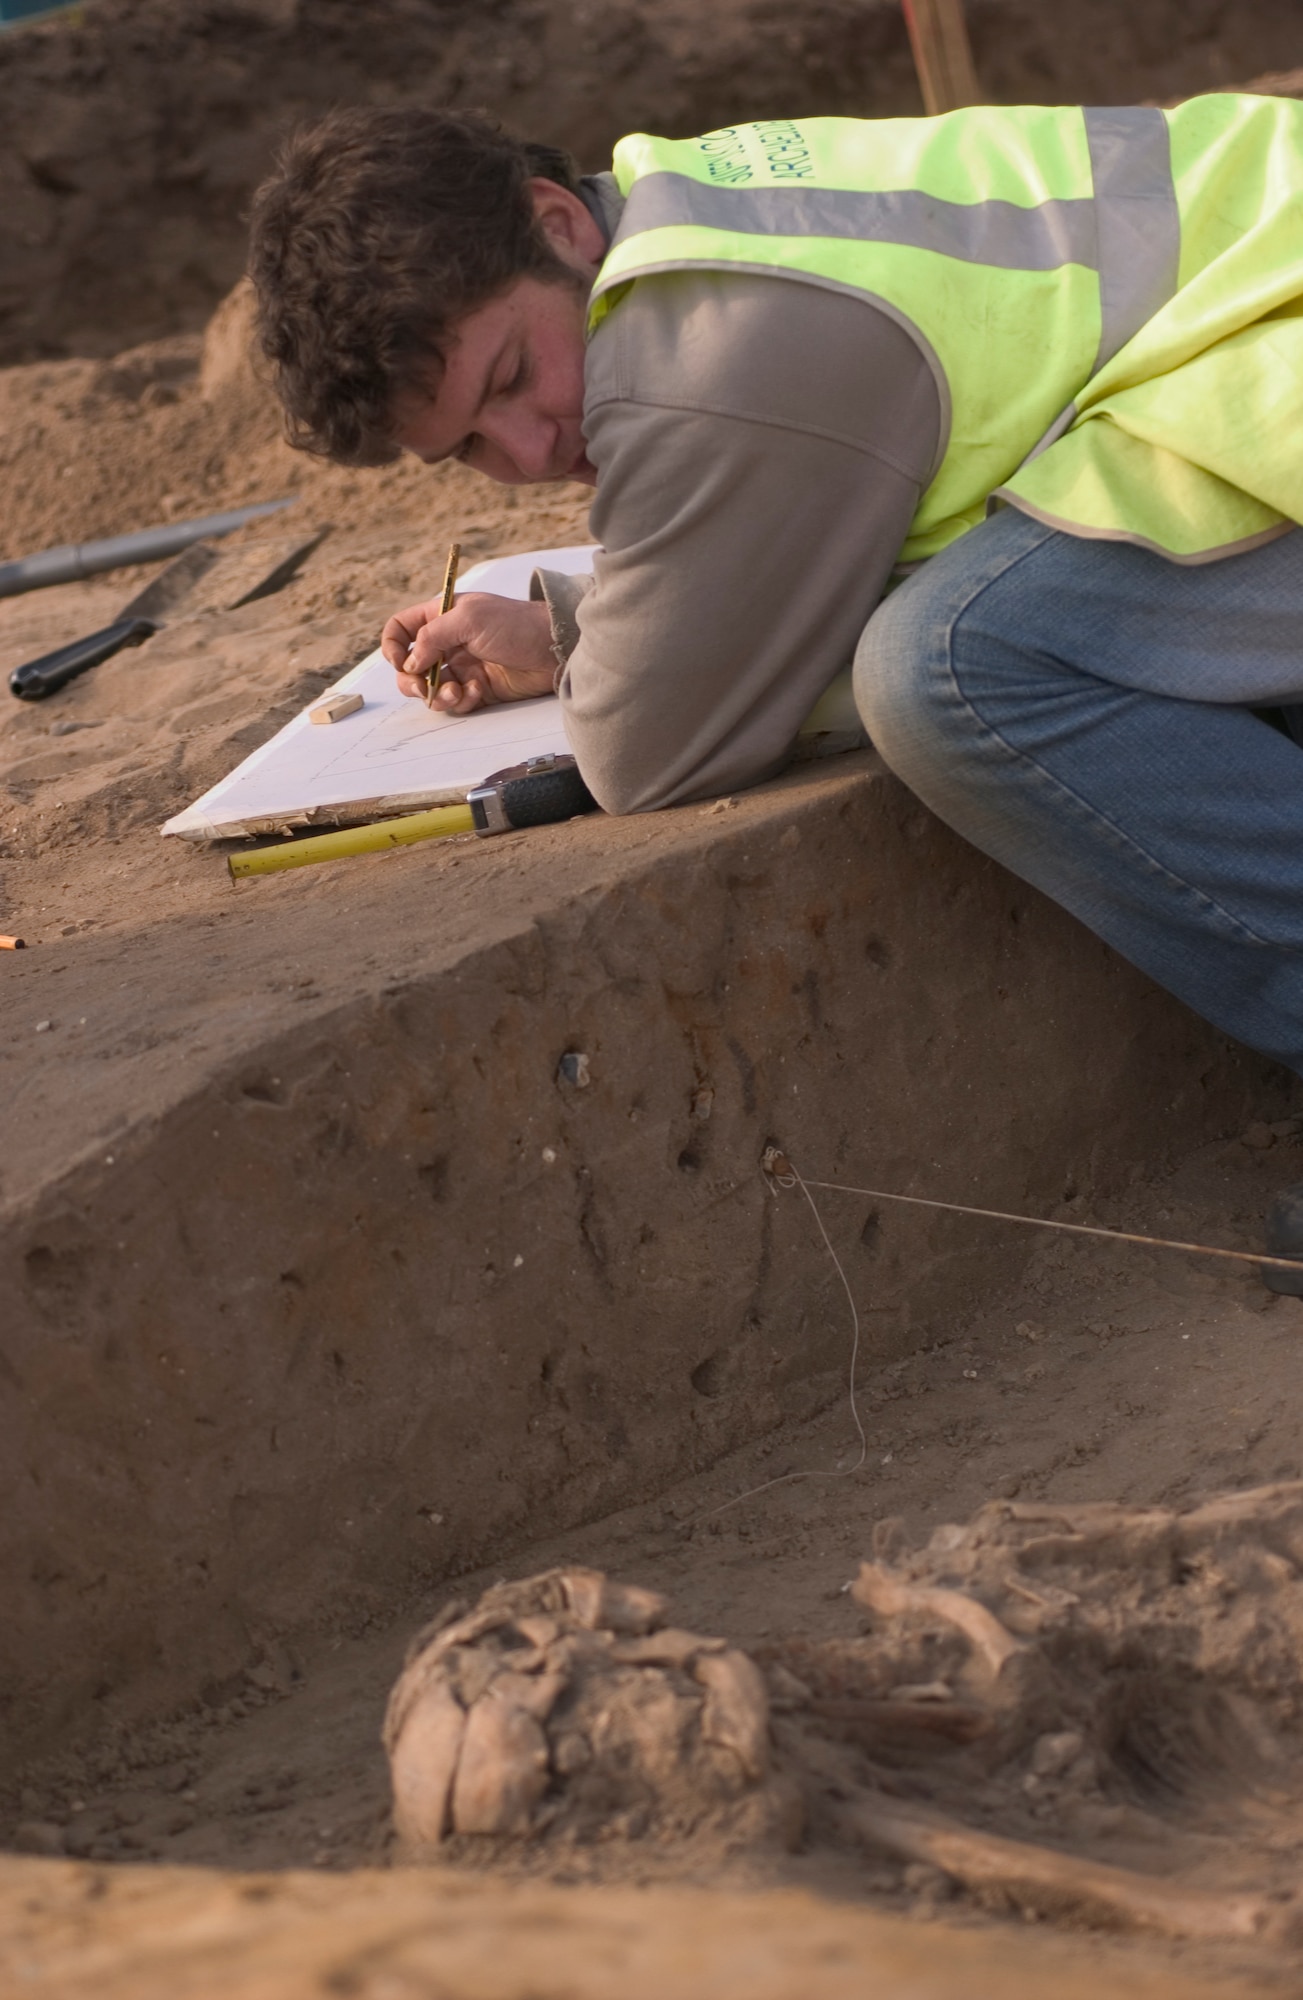 John Sims, an archeologist for Suffolk County Council, England, sketches a drawing March 14 of human remains prior to removing the bones for further study at the company's home office. The skeleton was found during an excavation of land where new base housing is planned to be constructed. It was estimated on site to be of 1st Century AD. Roman descent between 1,900 and 2,000 years old.  Mr. Sims has worked for Suffolk County Council for one and a half months, and the skeleton is his first significant find. (Air Force photo by Tech. Sgt. Tracy L. DeMarco)
